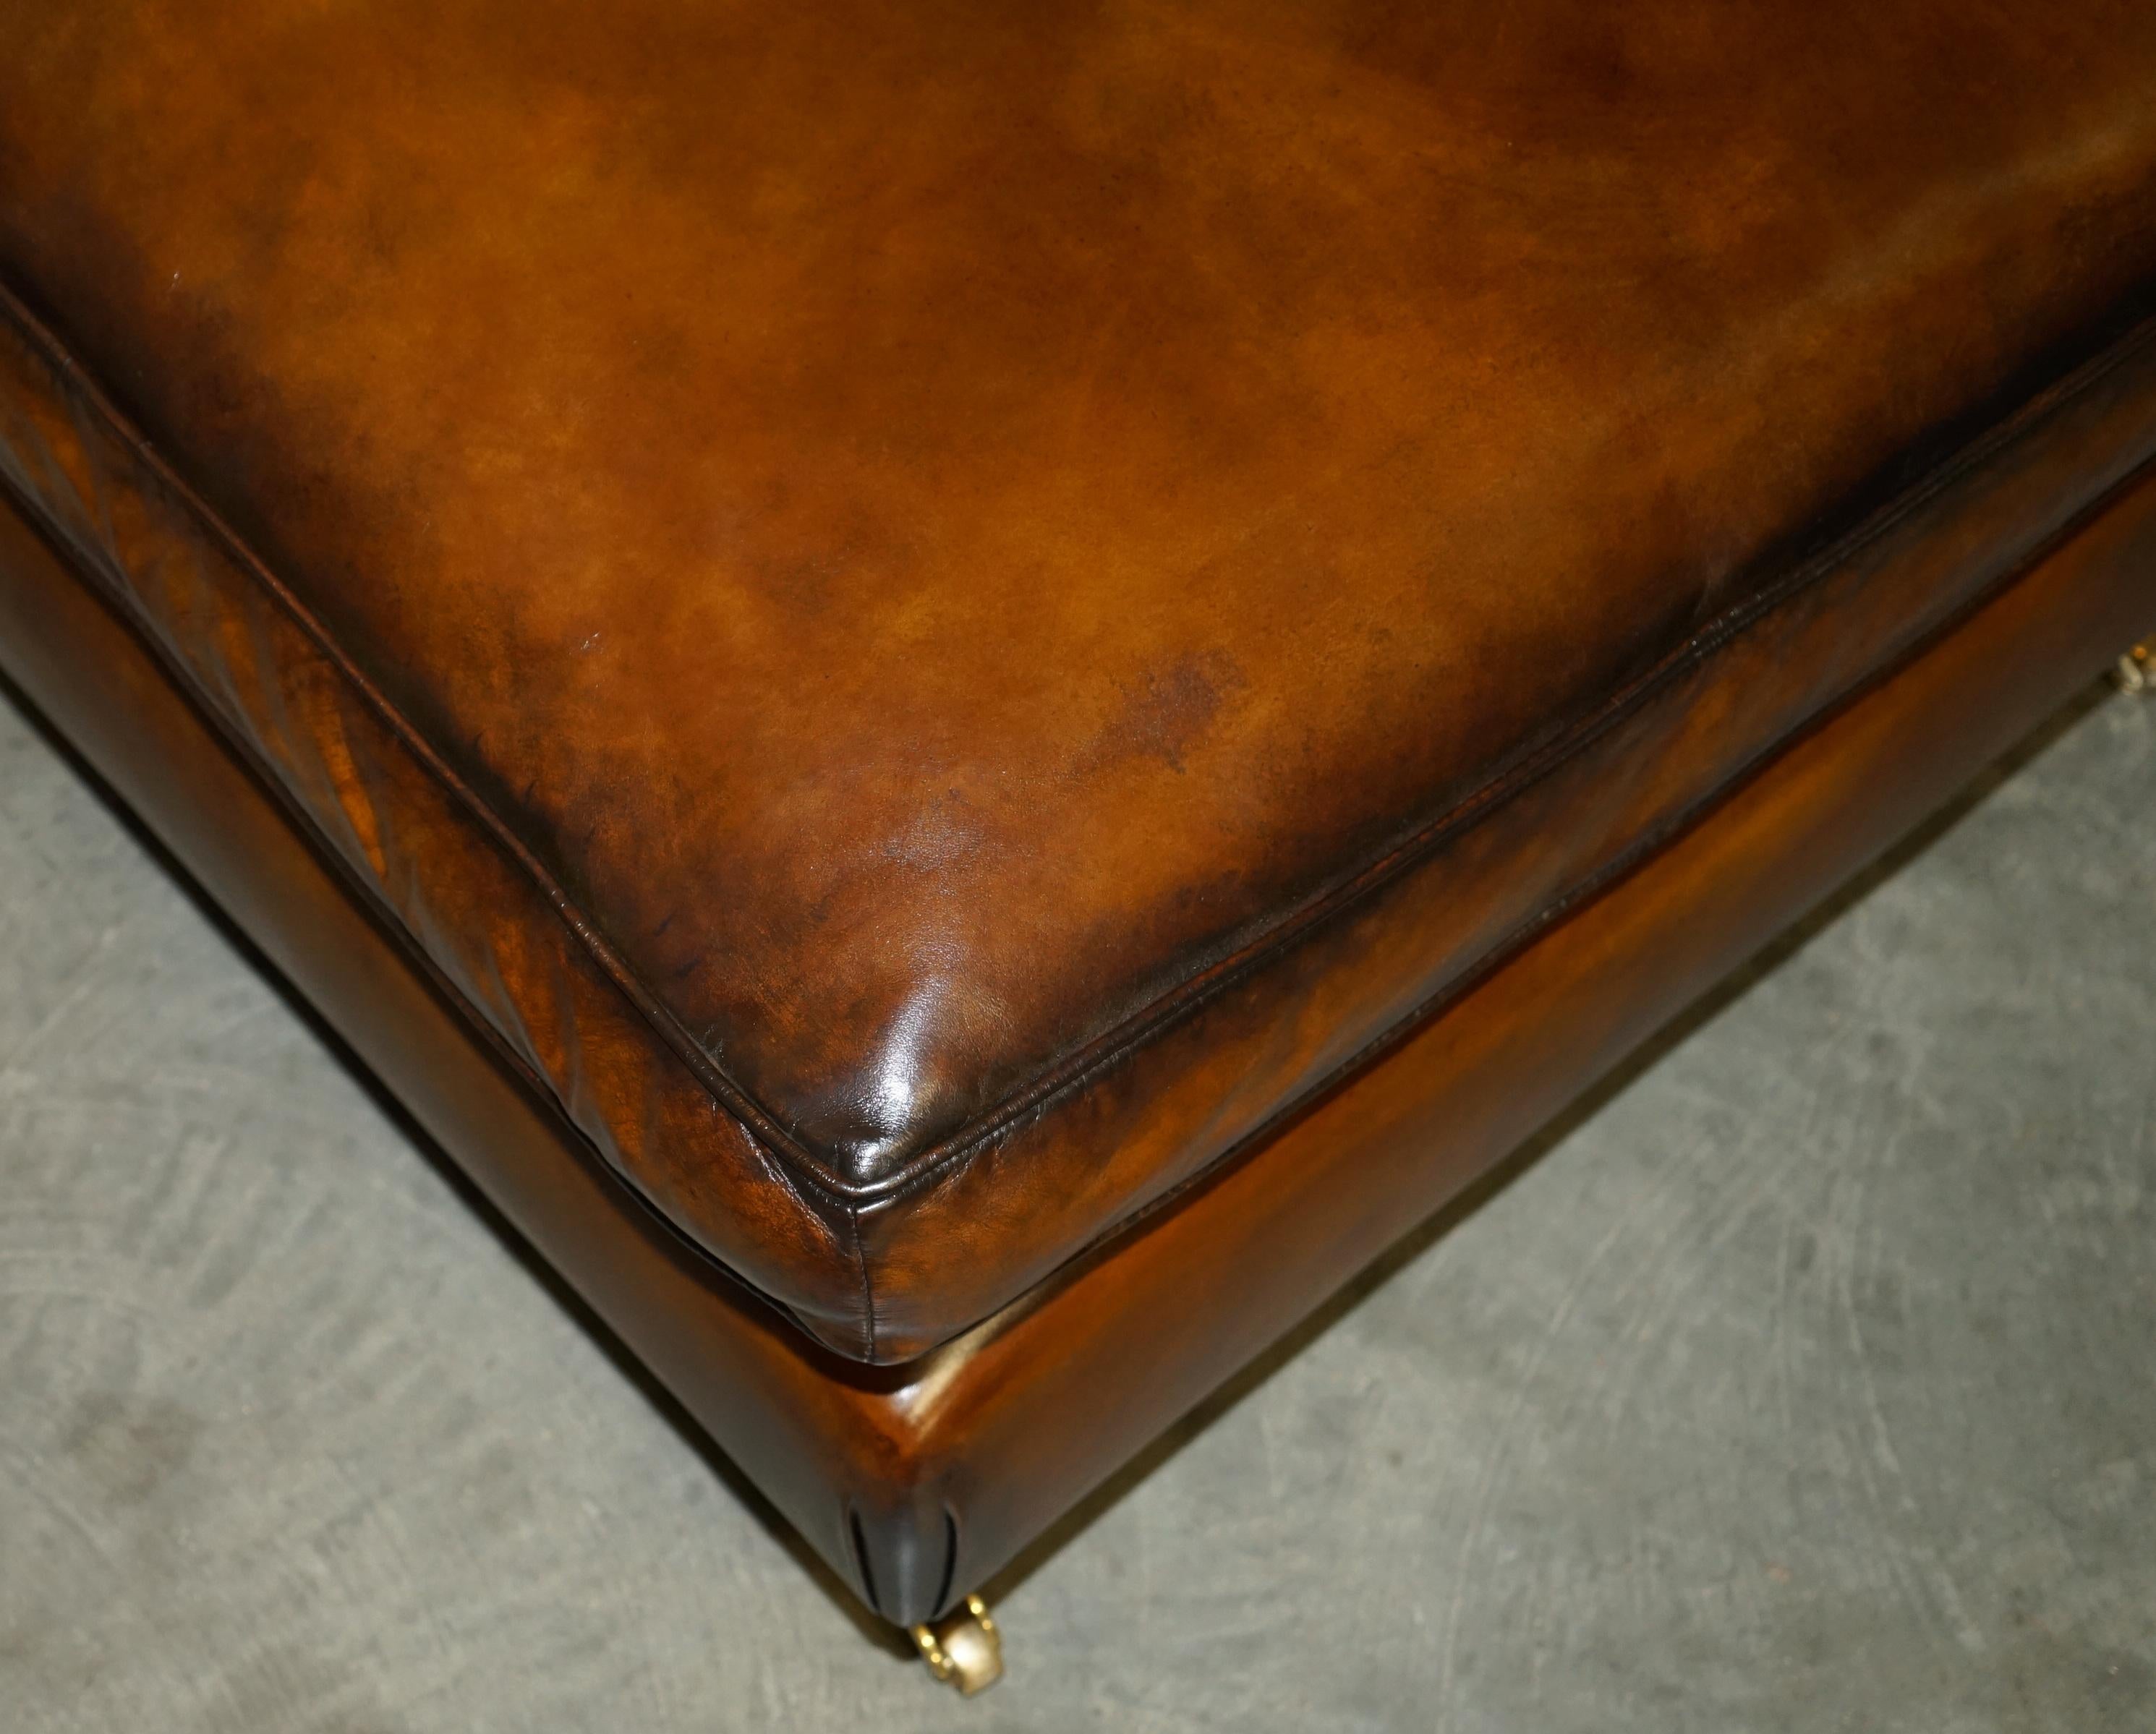 EXTRA LARGE FEATHER SEATHER SEAT RESTORED BROWN LEATHER OTTOMAN FOOTSTOOL PART OF SUiTE (Leder) im Angebot